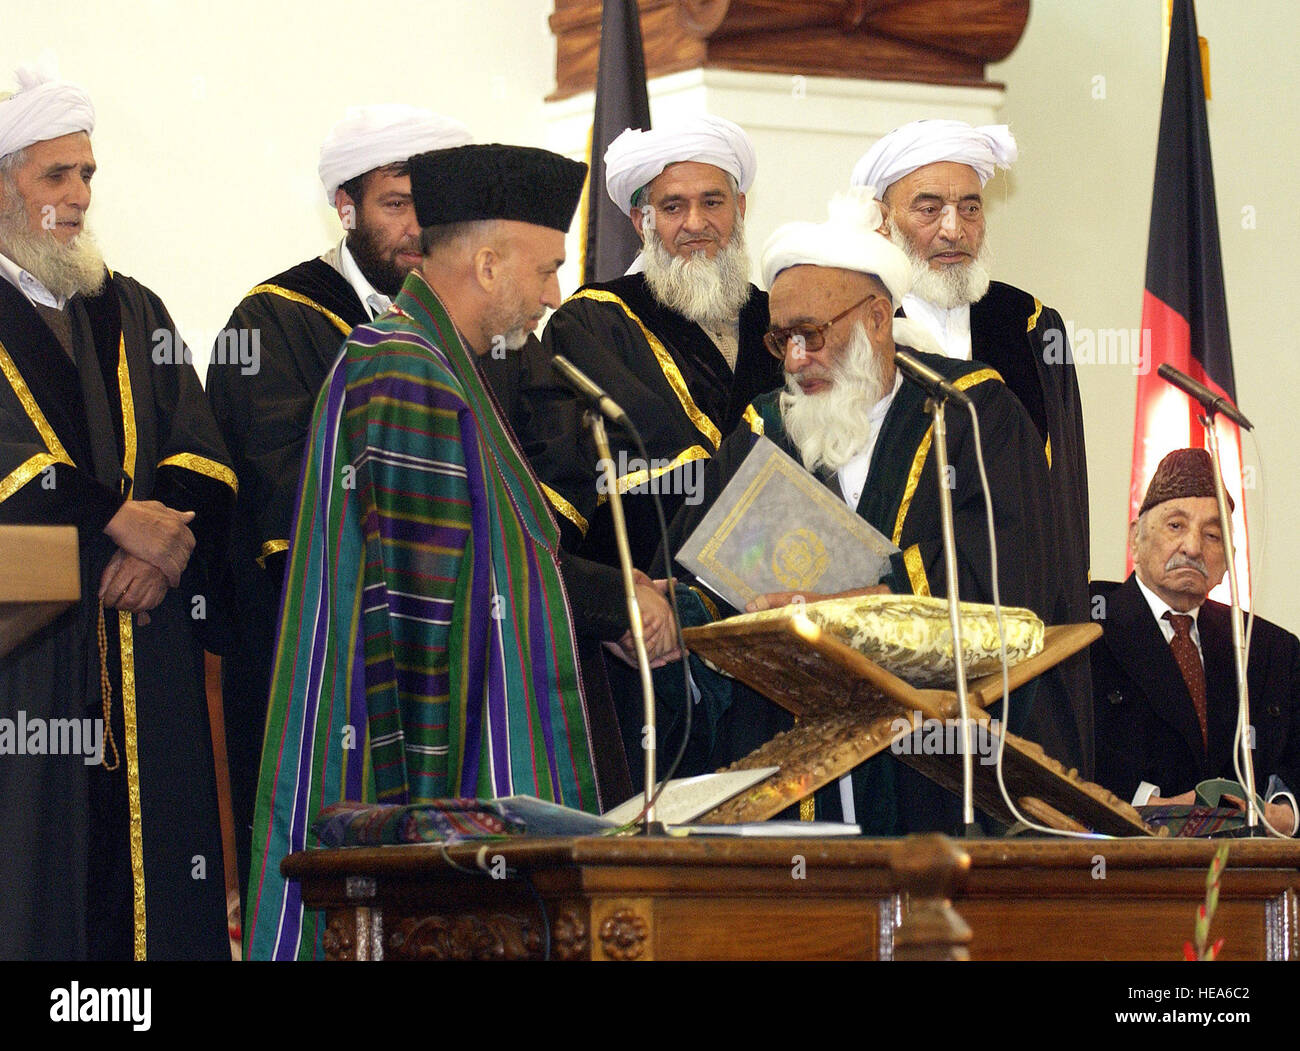 041207-F-5586B-025 Afghanistan President Hamid Karzai (left) is congratulated by Chief Justice of the Supreme Court of Afghanistan Faisal Ahmad Shinwari (right) after he was administered the oath of office during the Presidential Inauguration at Salaam Khana in Kabul, Afghanistan, on Dec. 7, 2004.  Vice President Richard Cheney and Secretary of Defense Donald H. Rumsfeld led the U.S delegation to the inauguration.   Master Sgt. James M. Bowman, U.S. Air Force.  (Released) Stock Photo